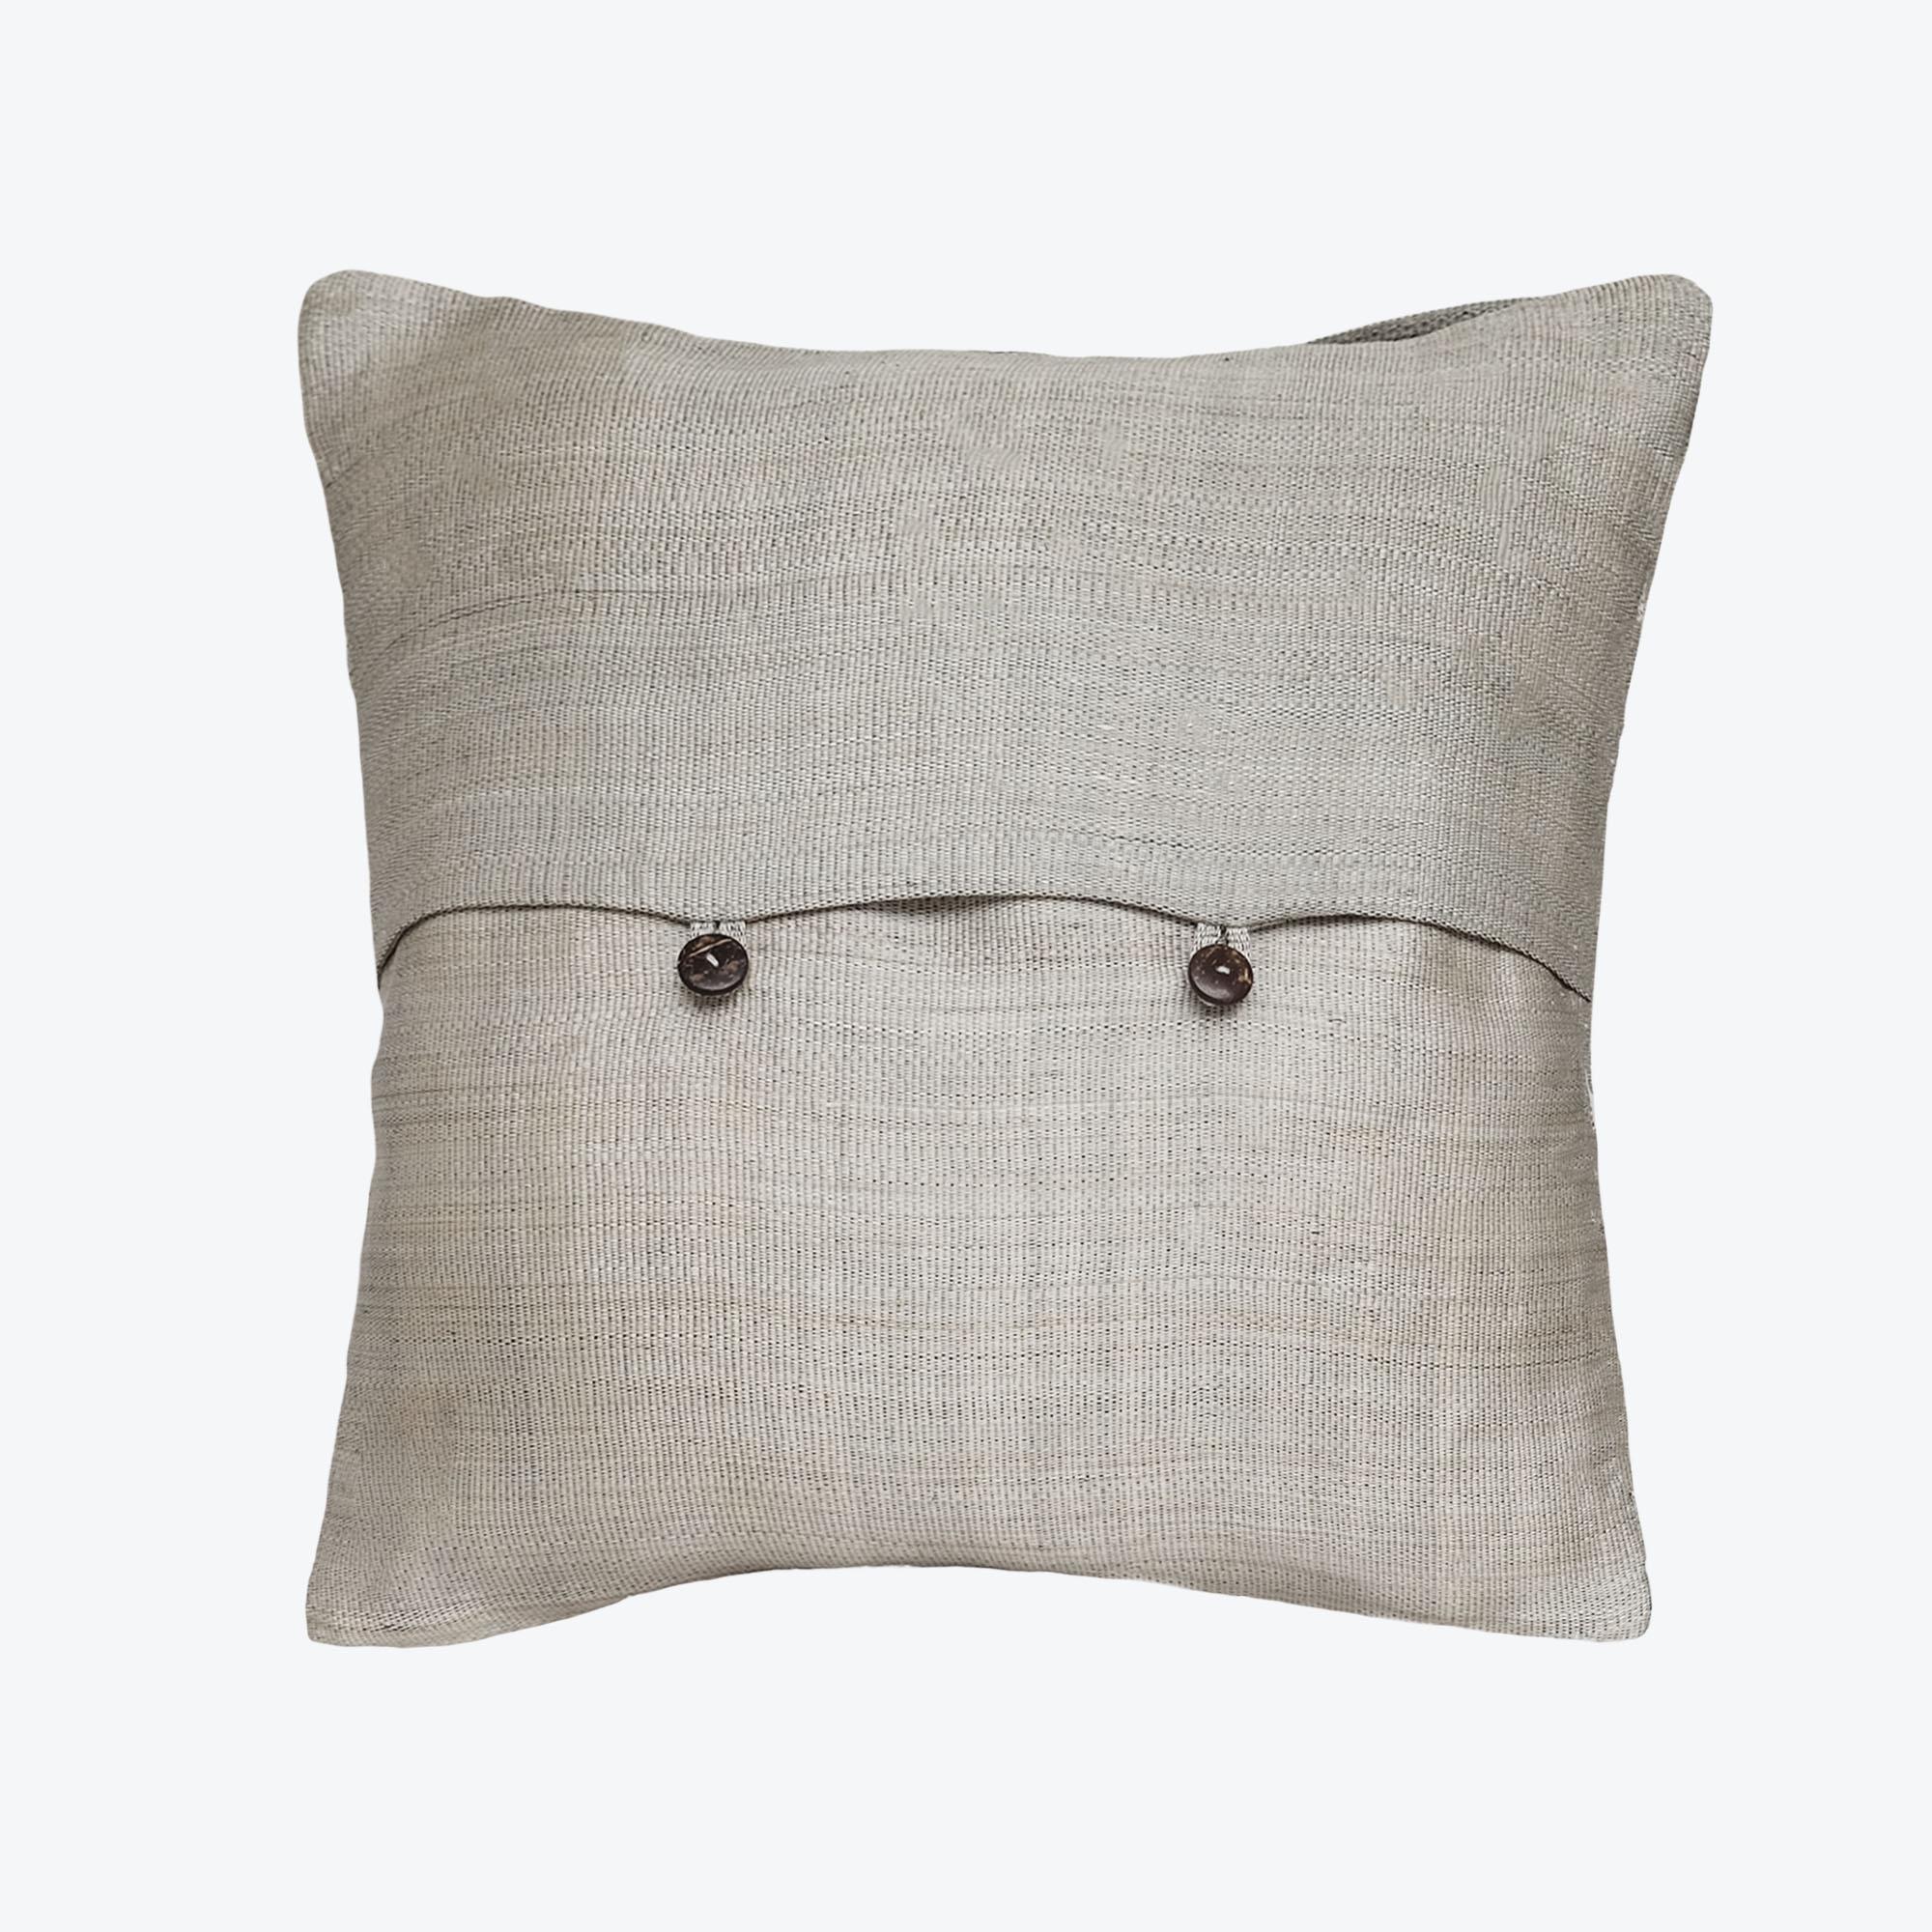 Philippine Handcrafted T'nalak Solihiya Weave Cushion Cover in Grey For Sale